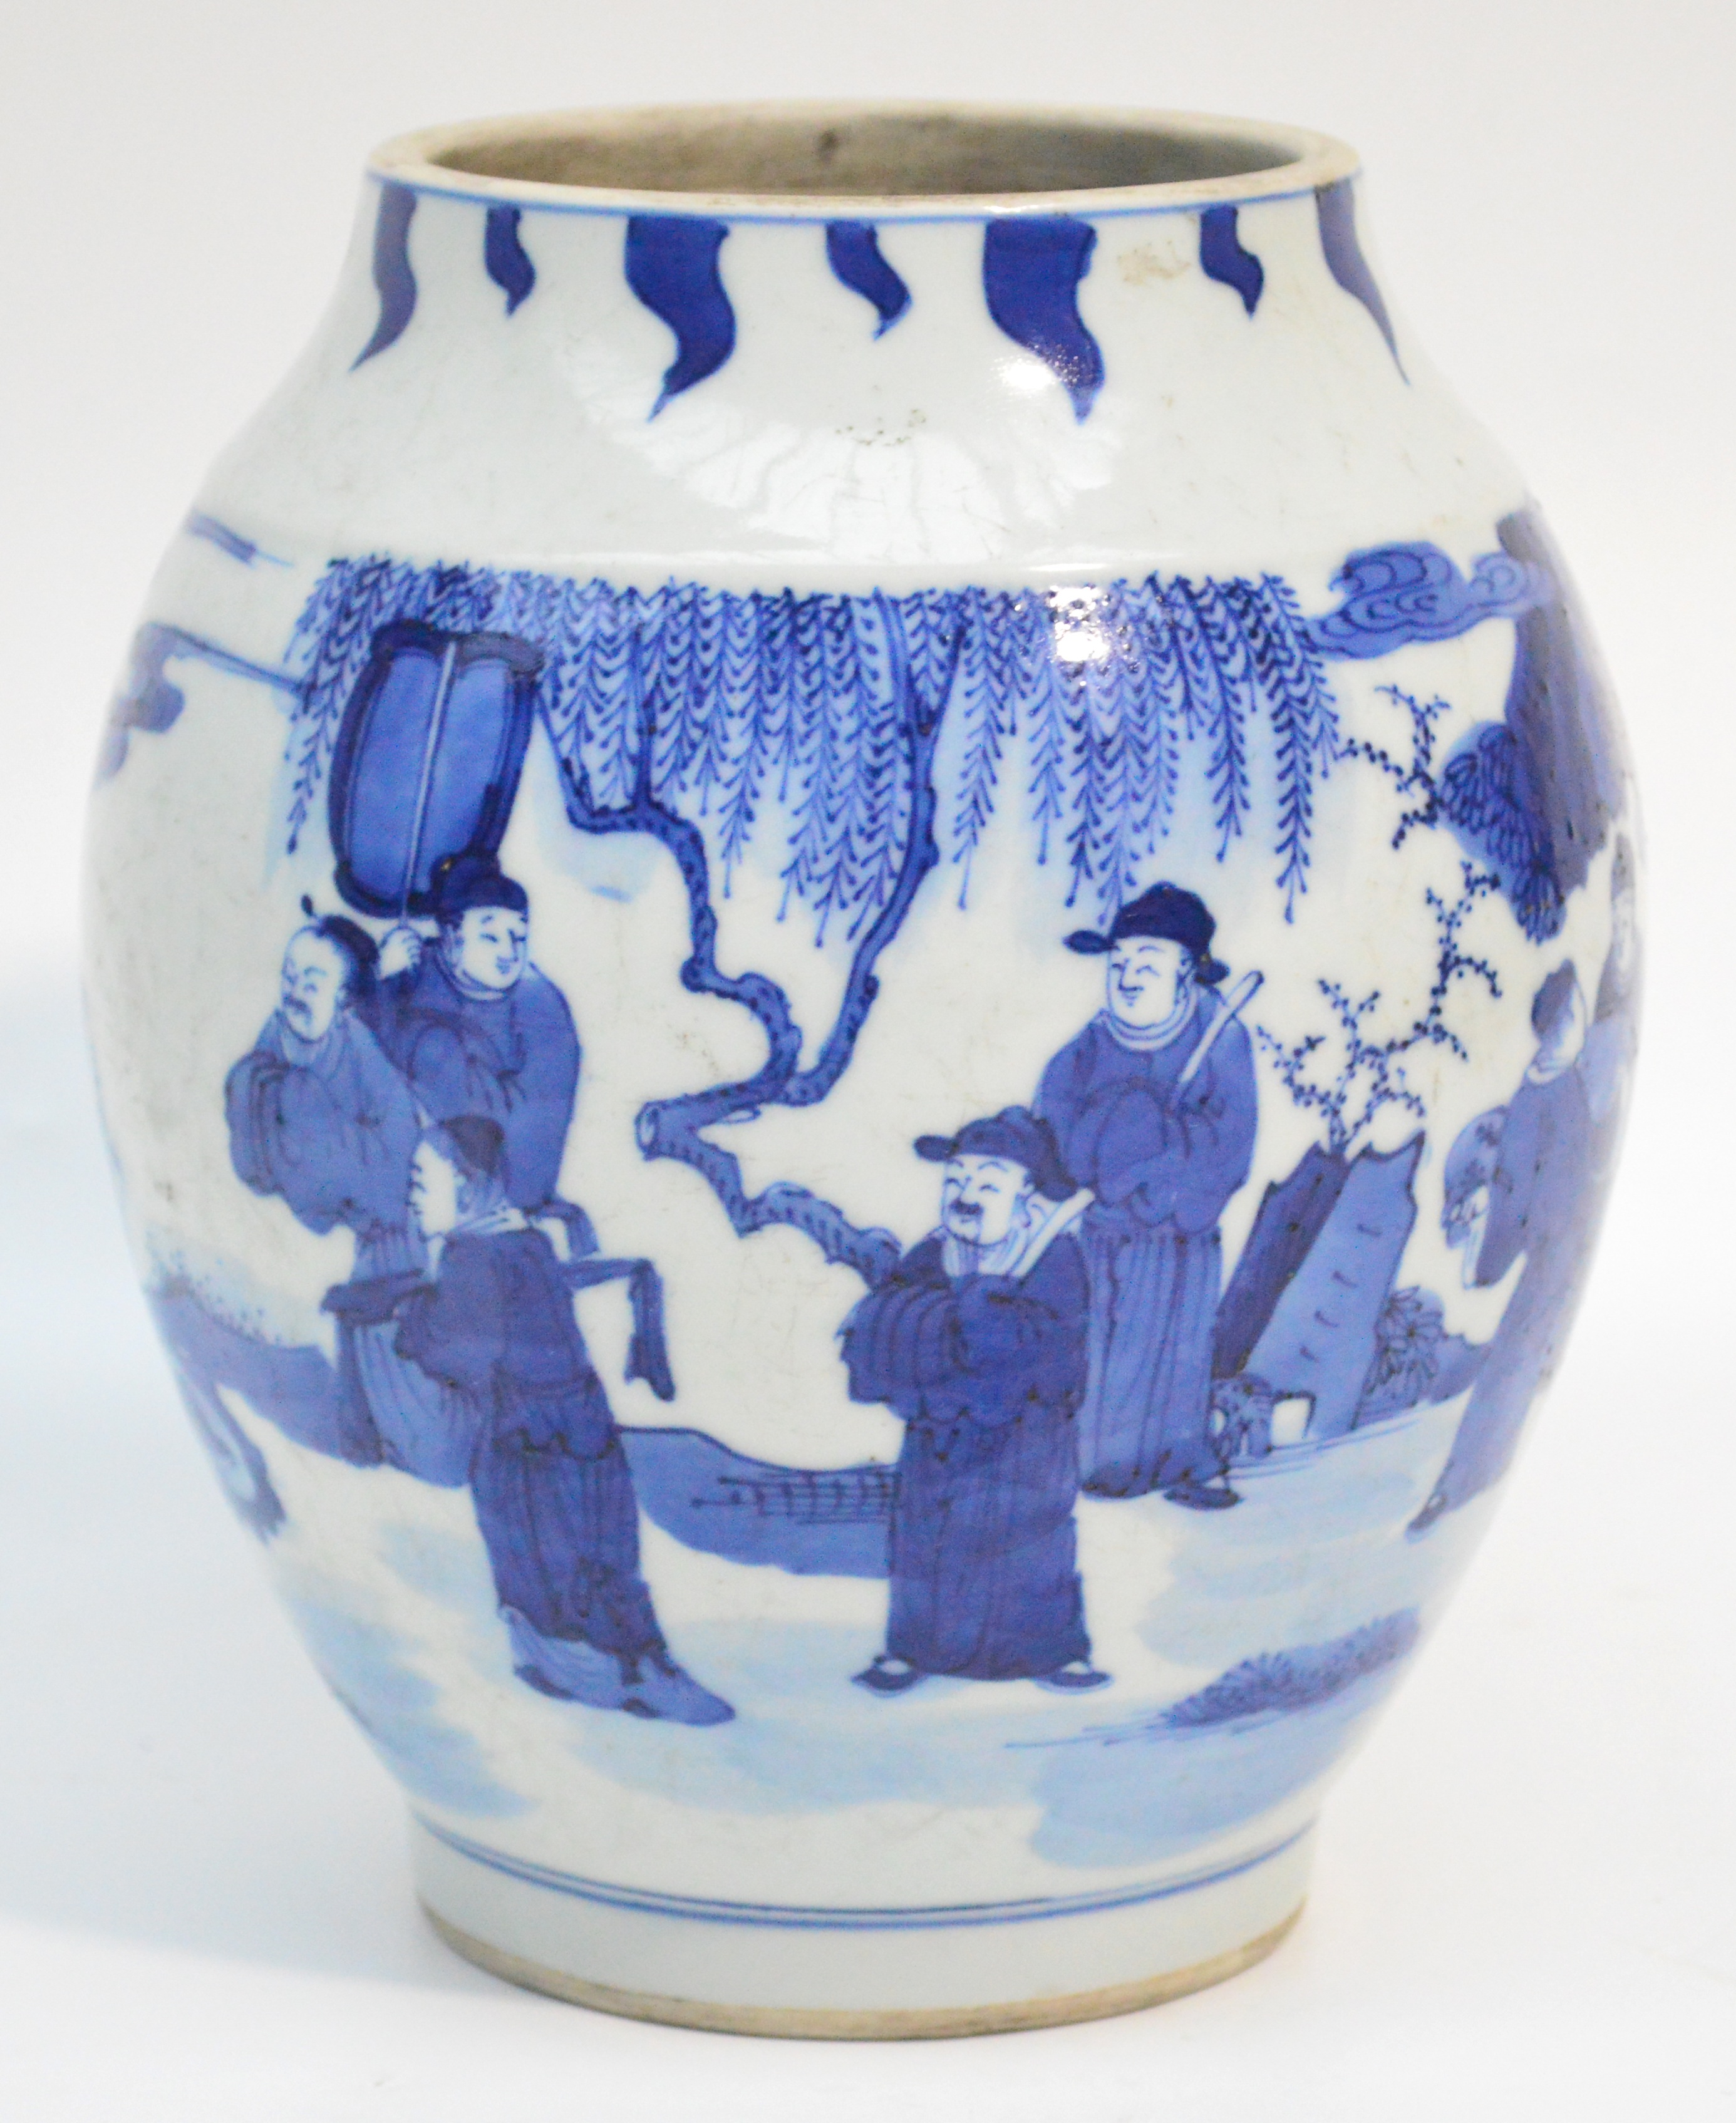 A Chinese porcelain ovoid vase, finely painted in underglaze blue with scholars beneath pine trees